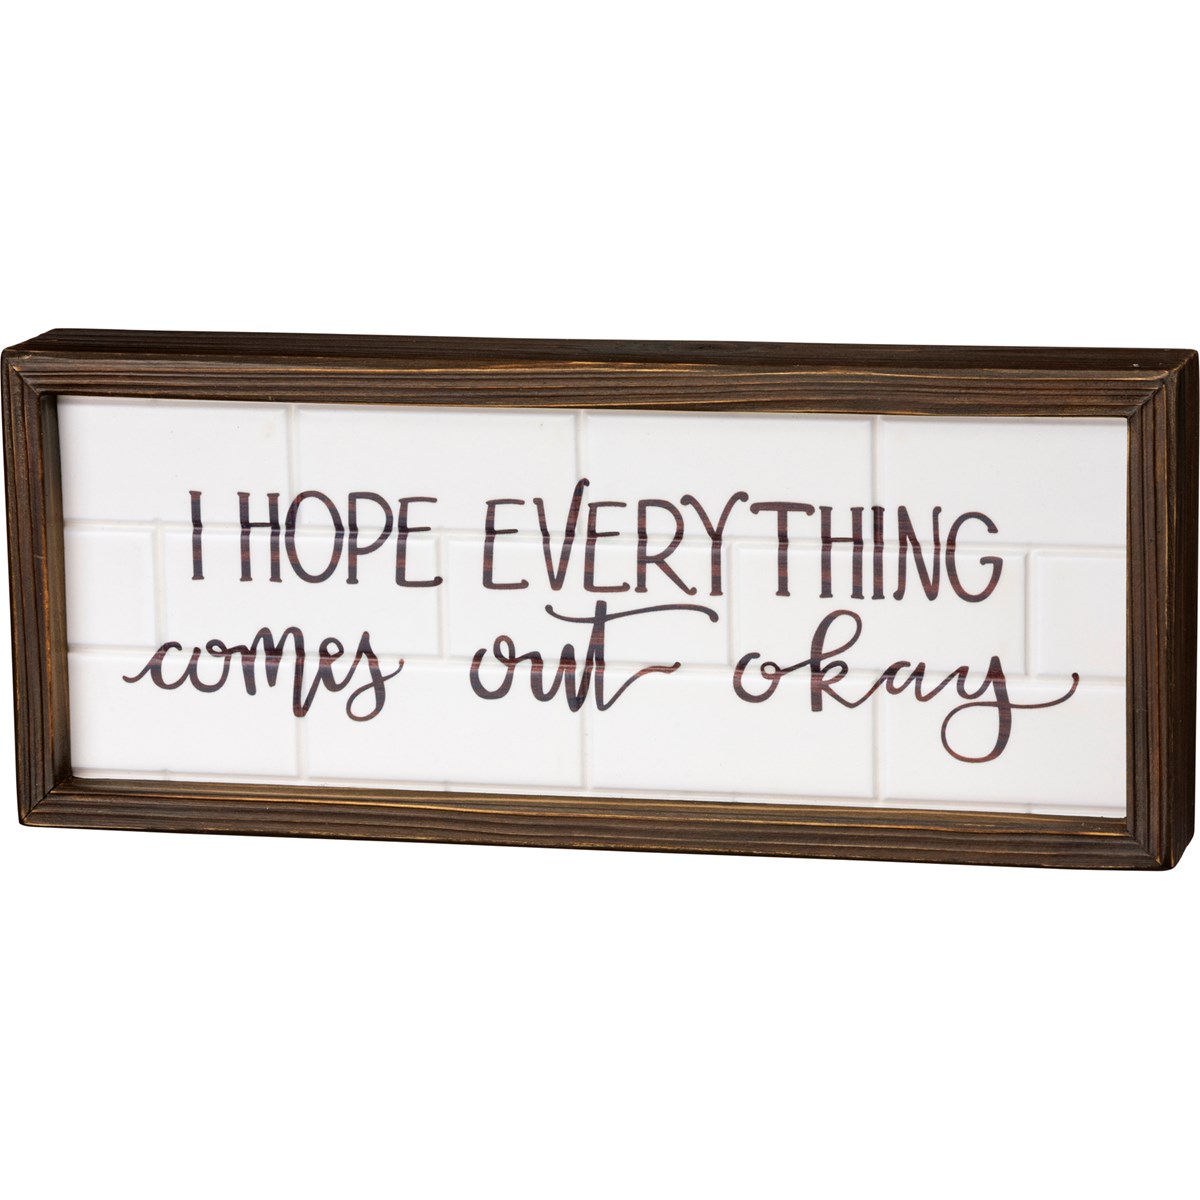 I Hope Everything Comes Out Okay Inset Box Sign - Wood